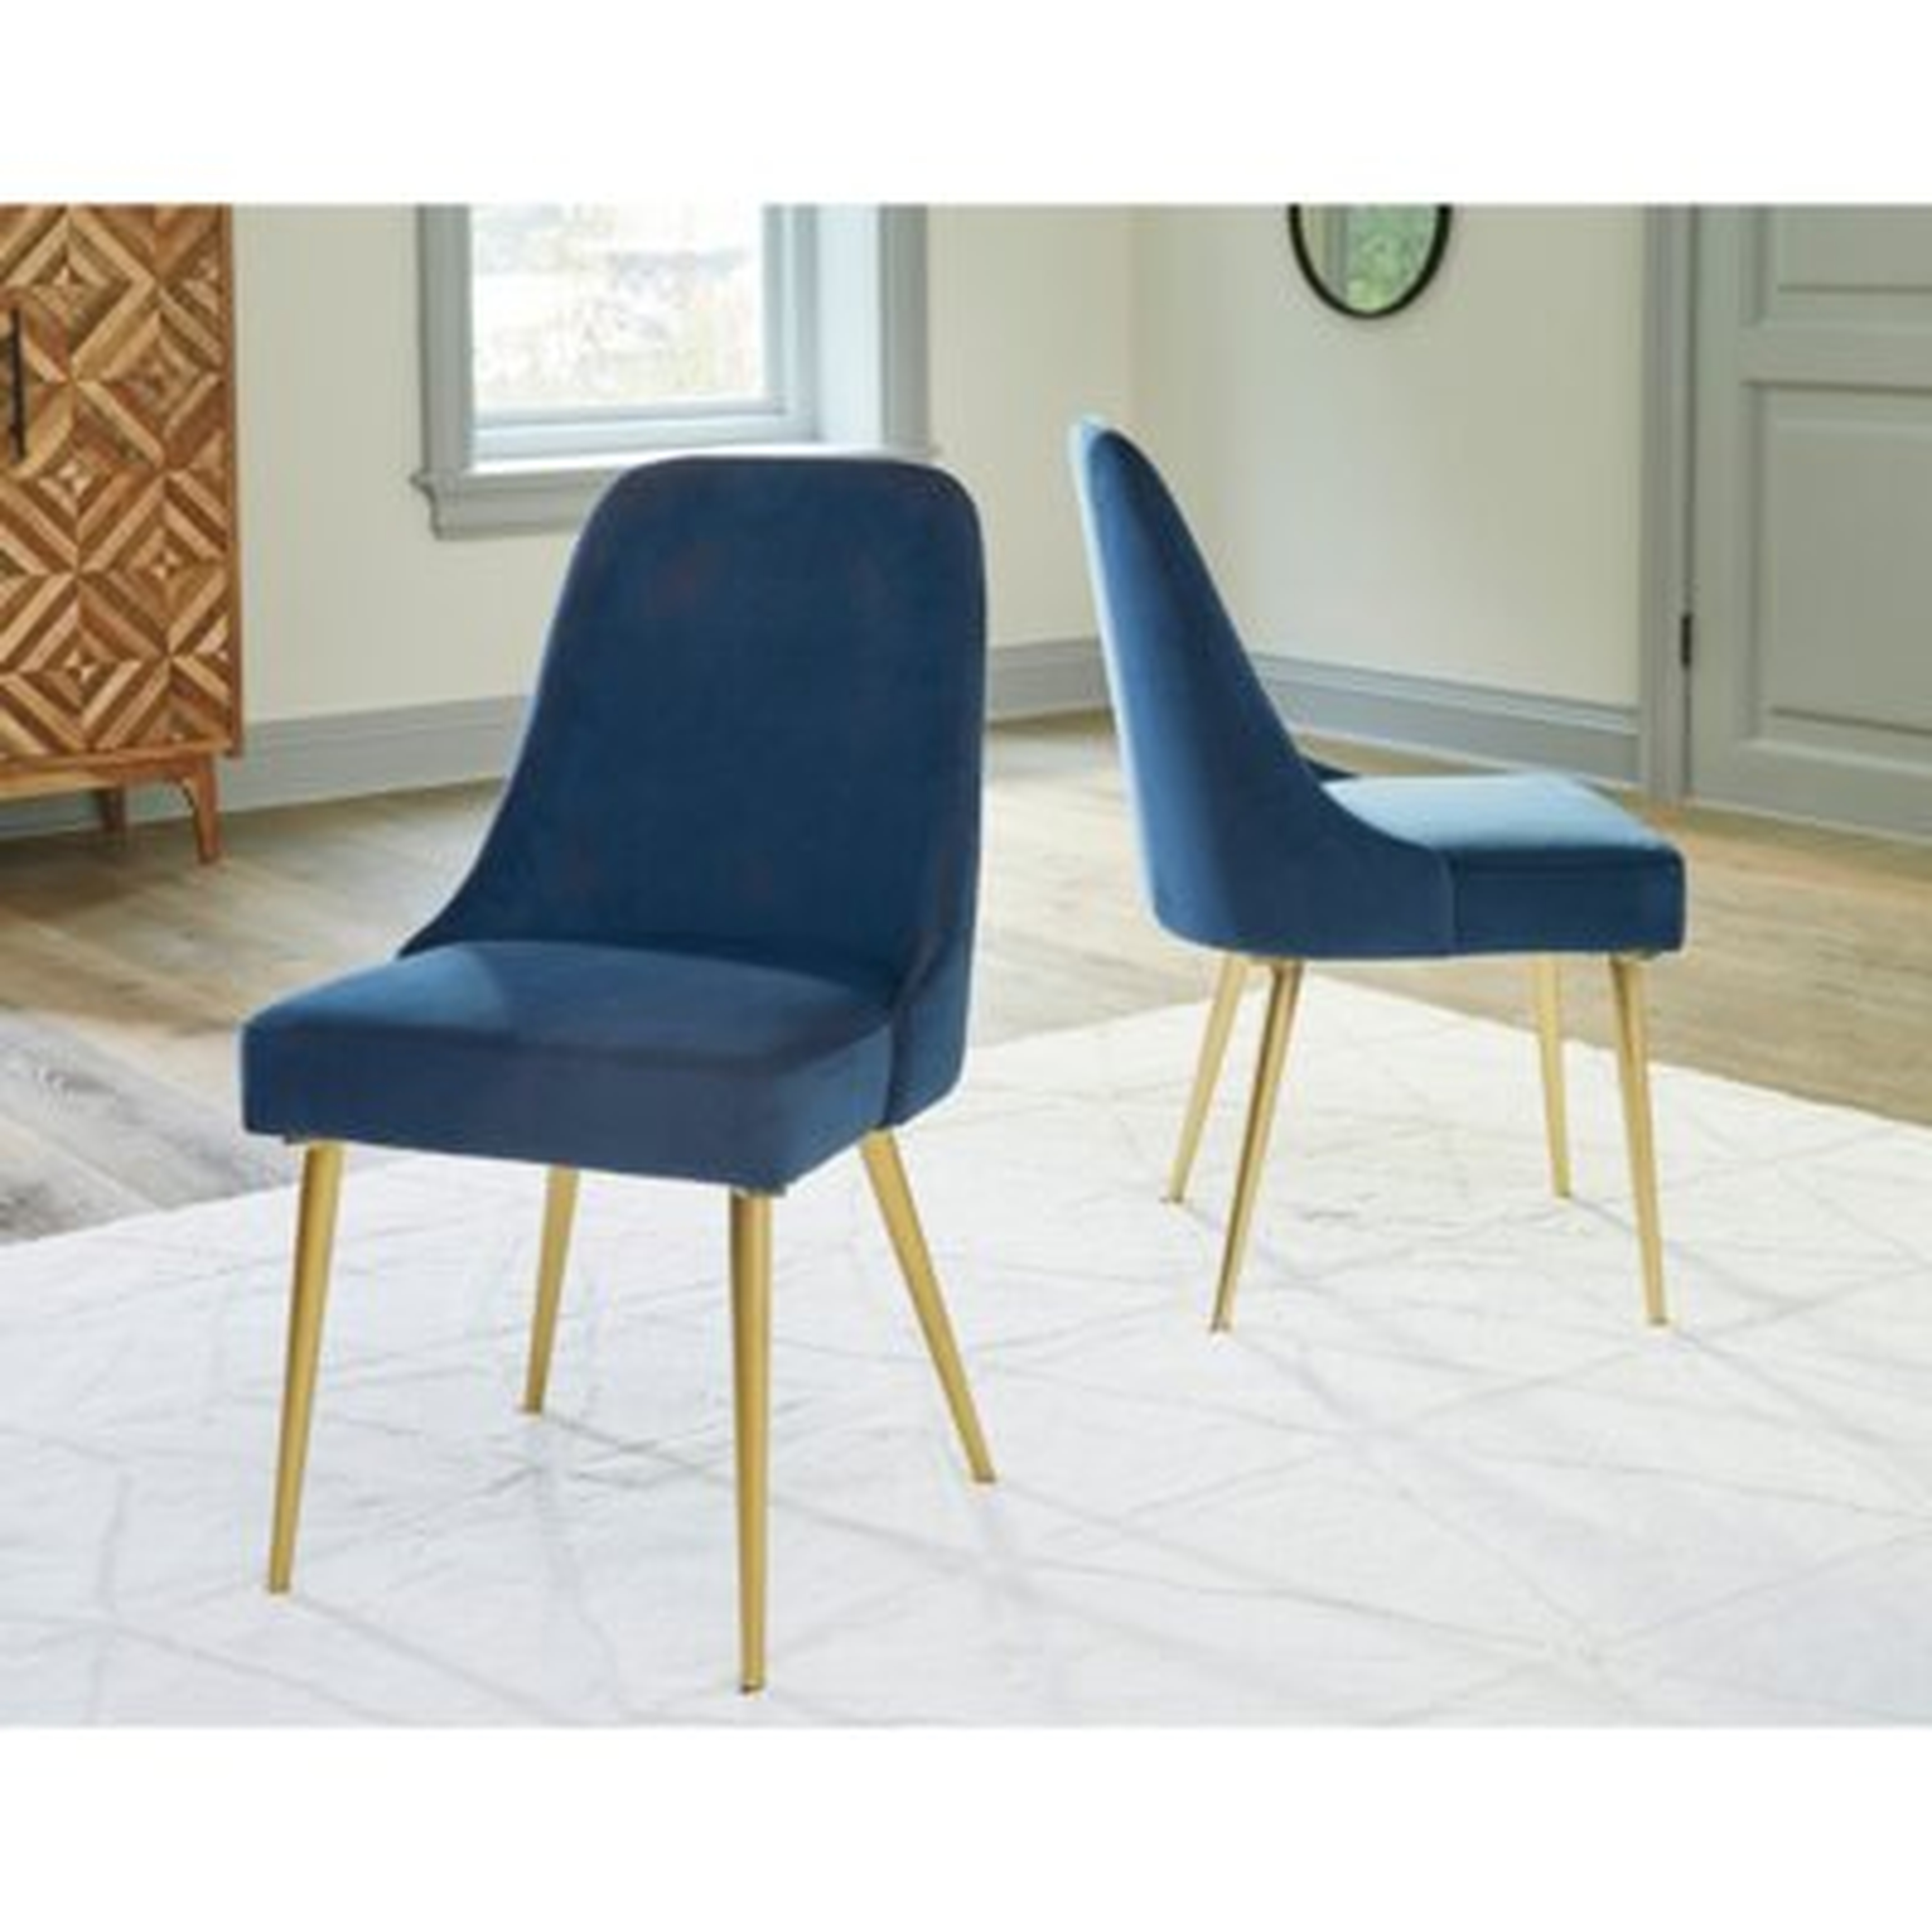 Upholstered Dining Chair in Blue (Set of 2) - Wayfair